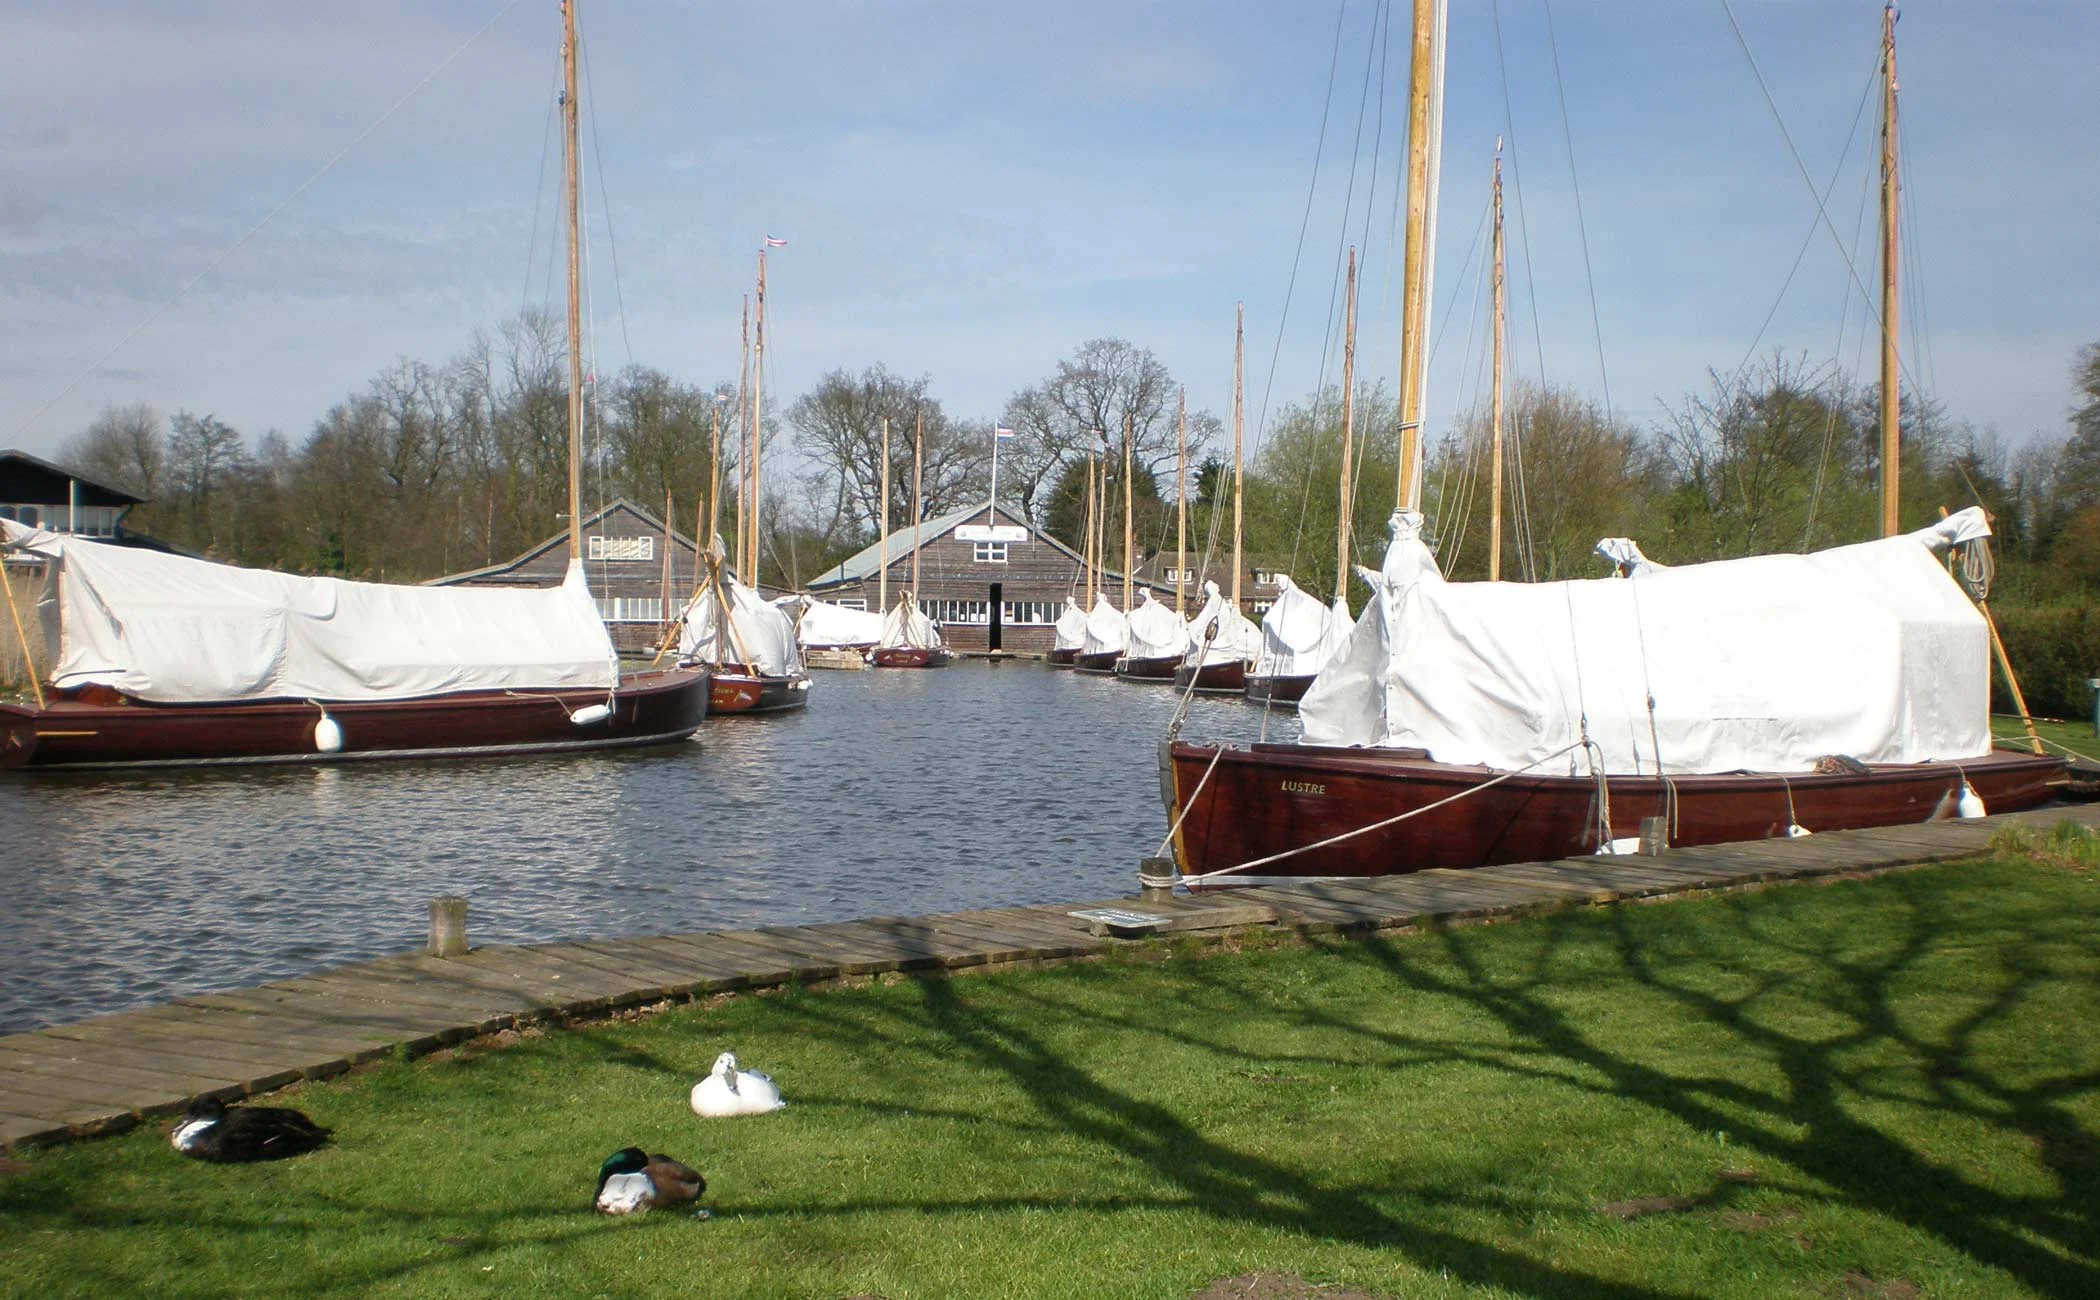 View of Hunter's Yard with the traditional wooden fleet covered and ready to sail.